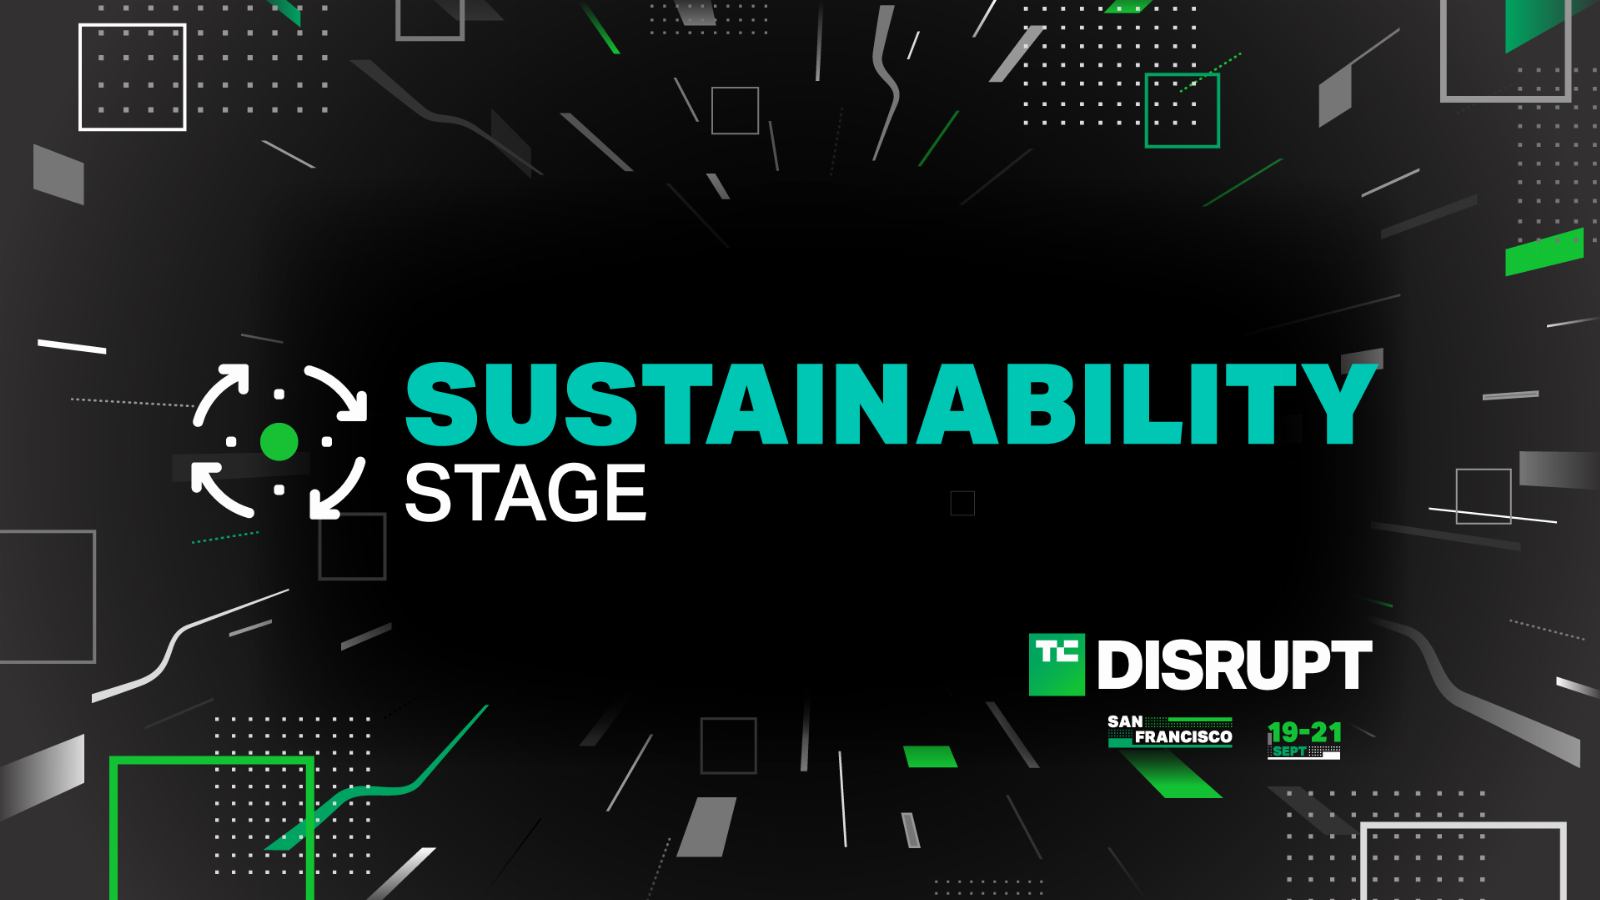 Sustainability at Disrupt